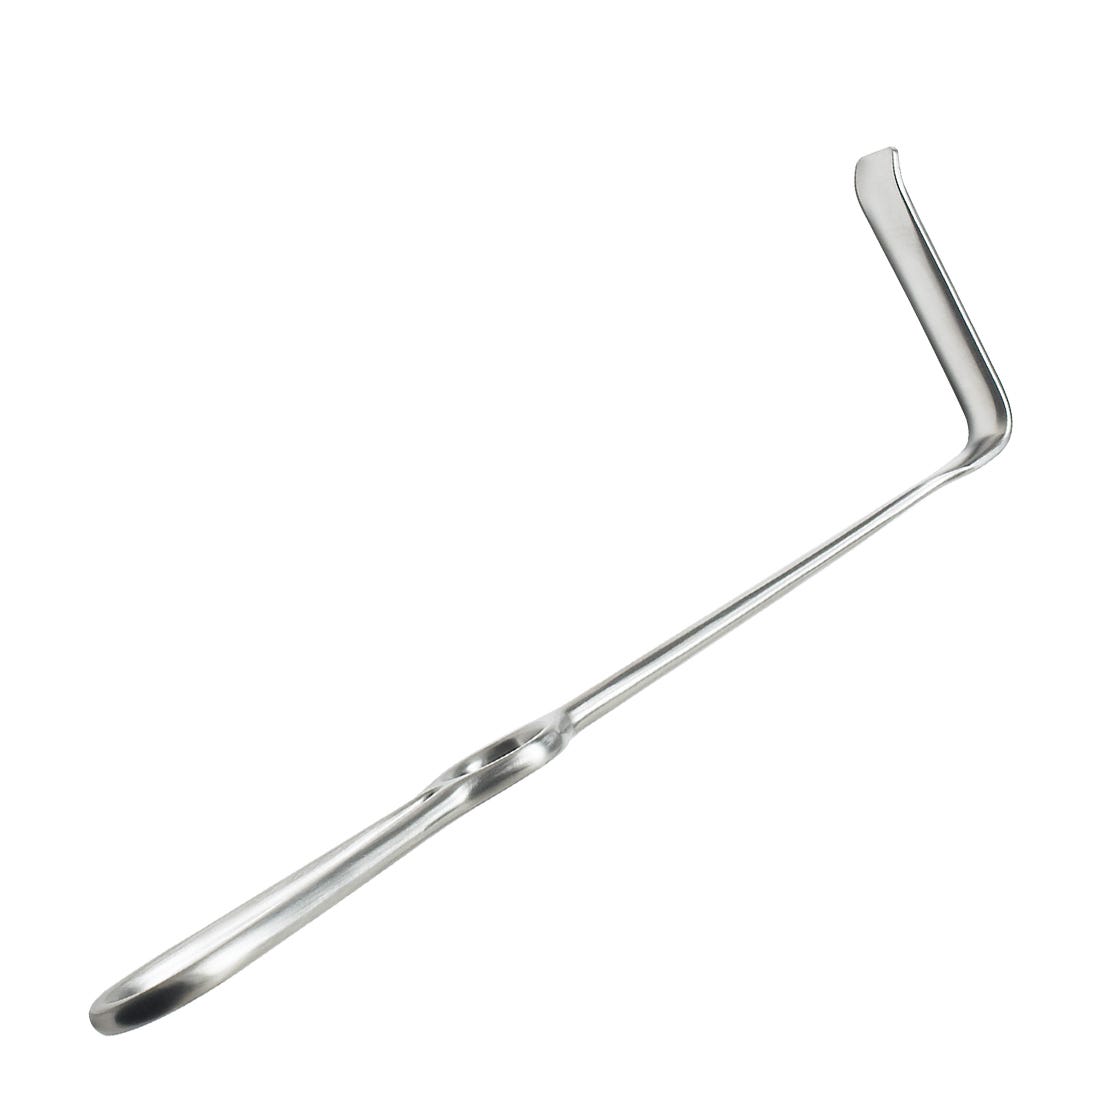 Obwegeser Type Surgical Retractor Concave, Curved Up, 12mm x 55mm